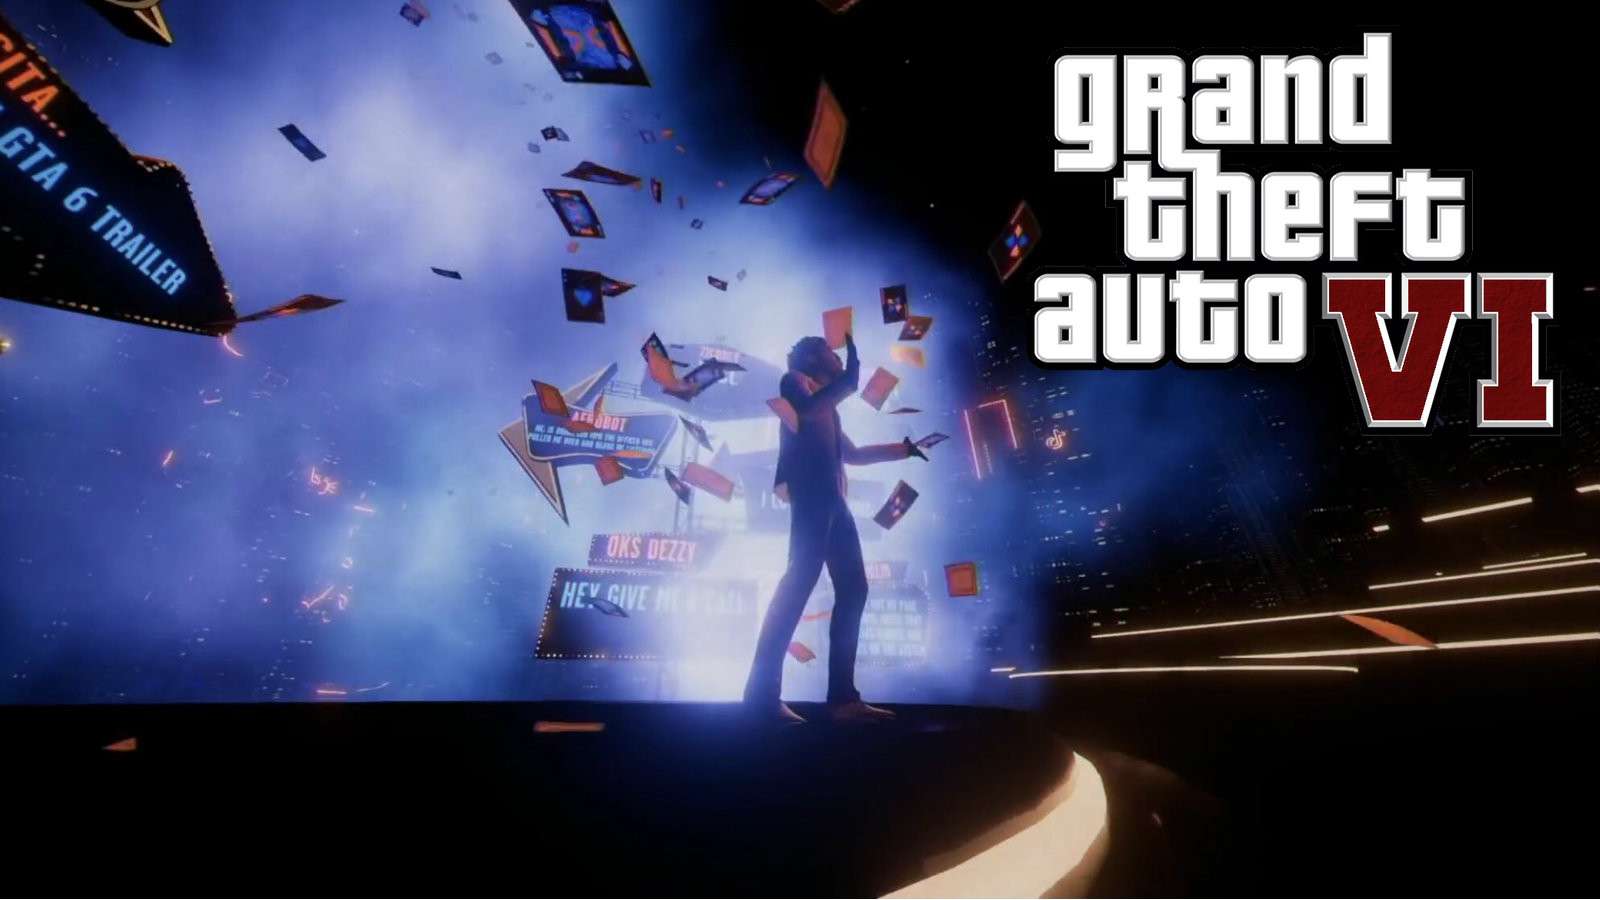 The Weeknd has a GTA 6 trailer message